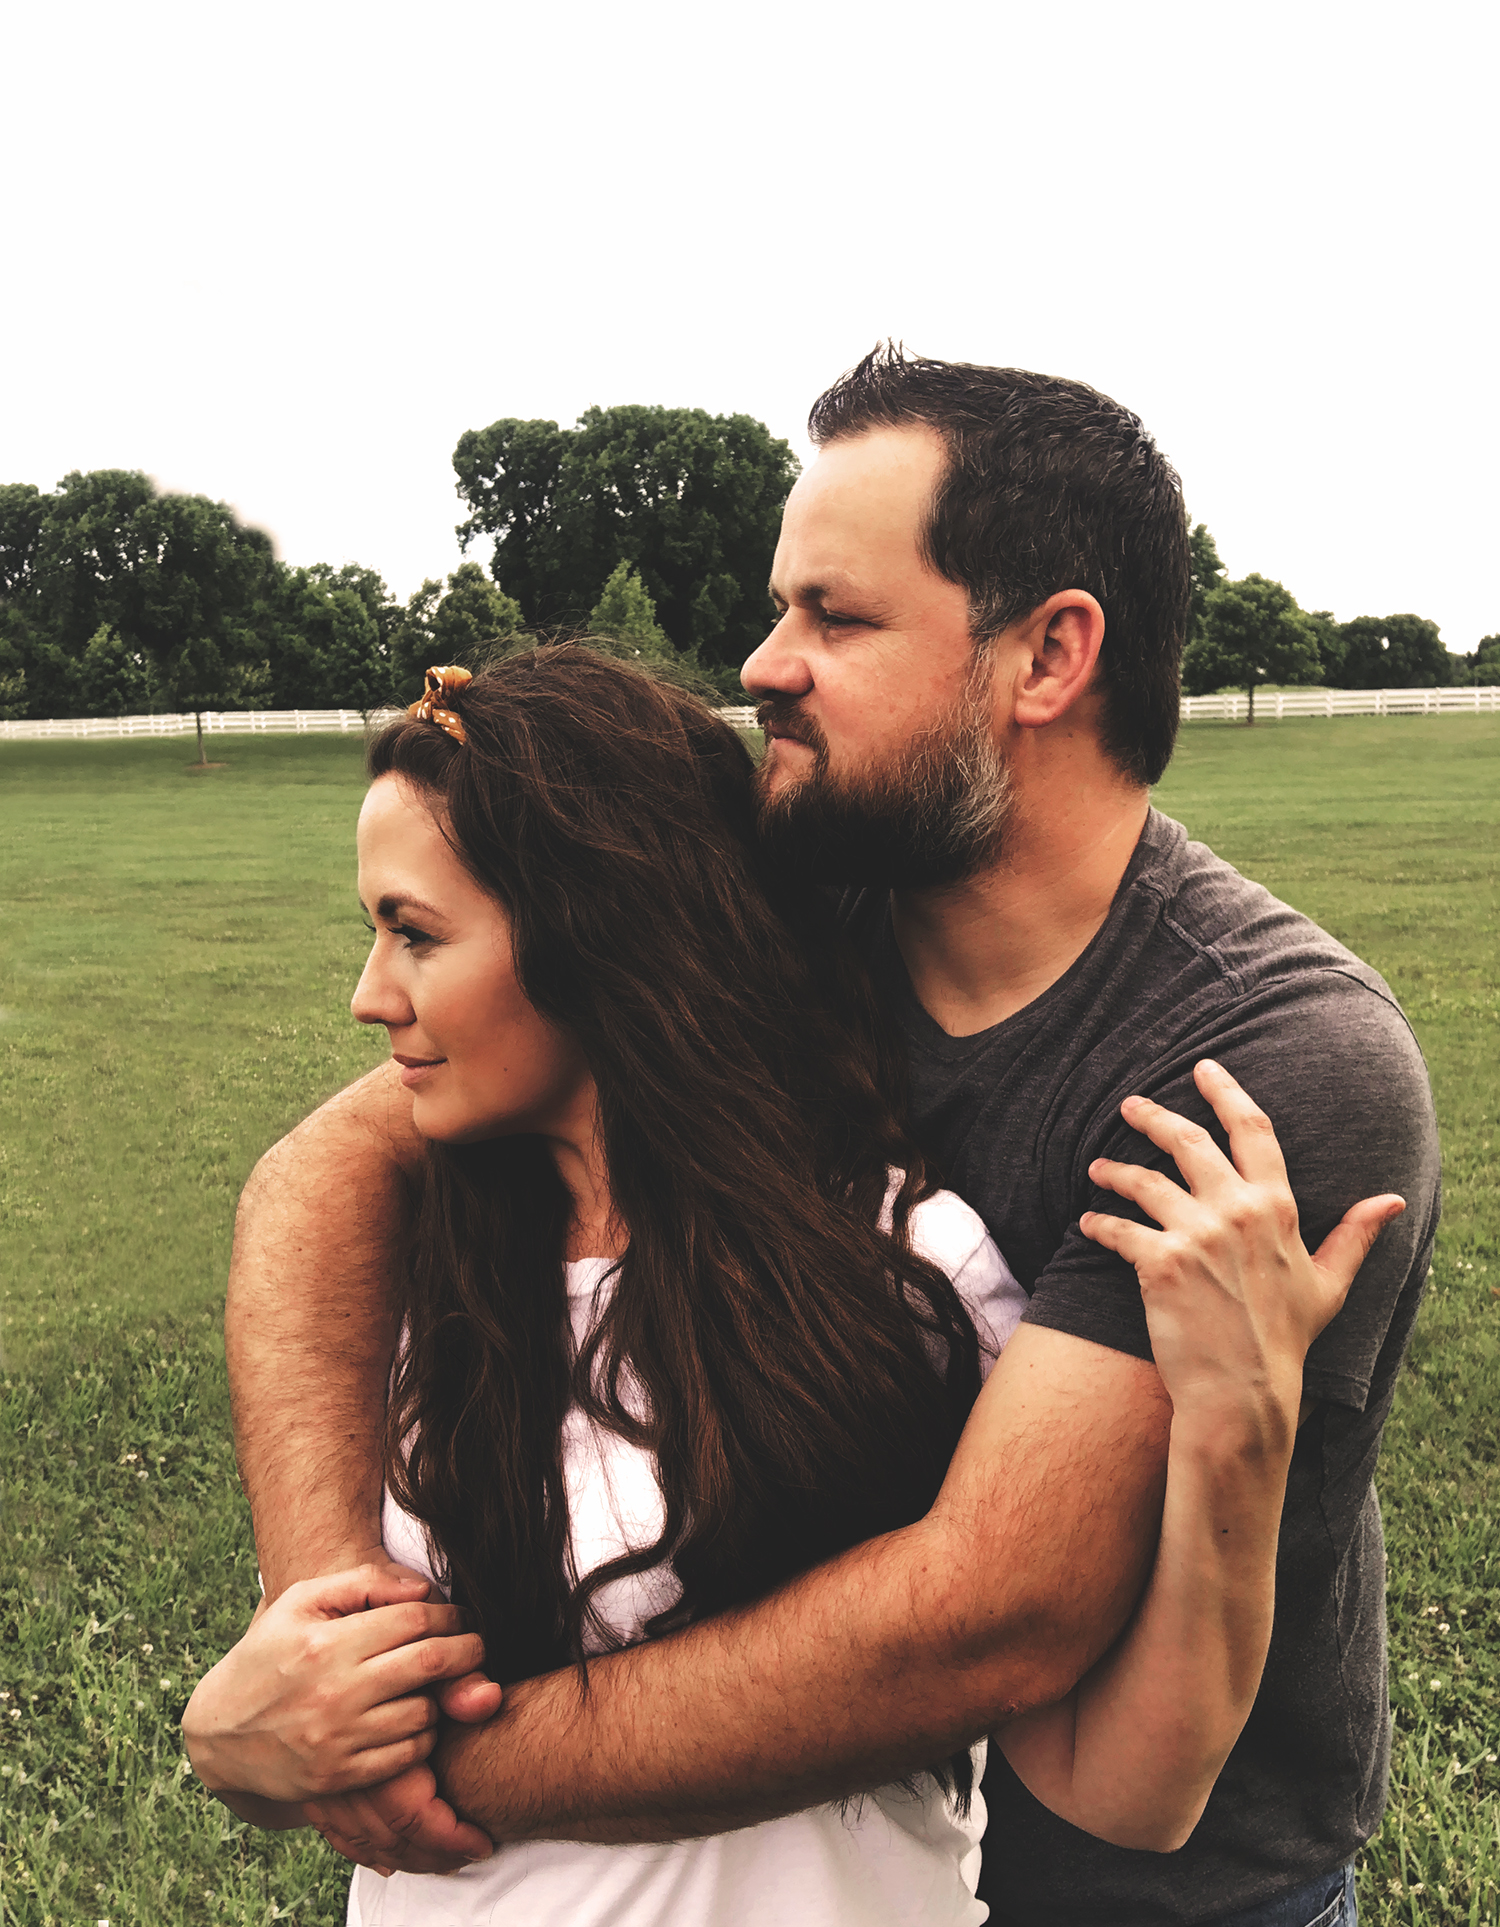 Fifteen years of marriage and what it has taught me. A little bit of love over on Haus of Layne #LoveAndMarriage #MarriageAdvice #AnniversaryIdeas